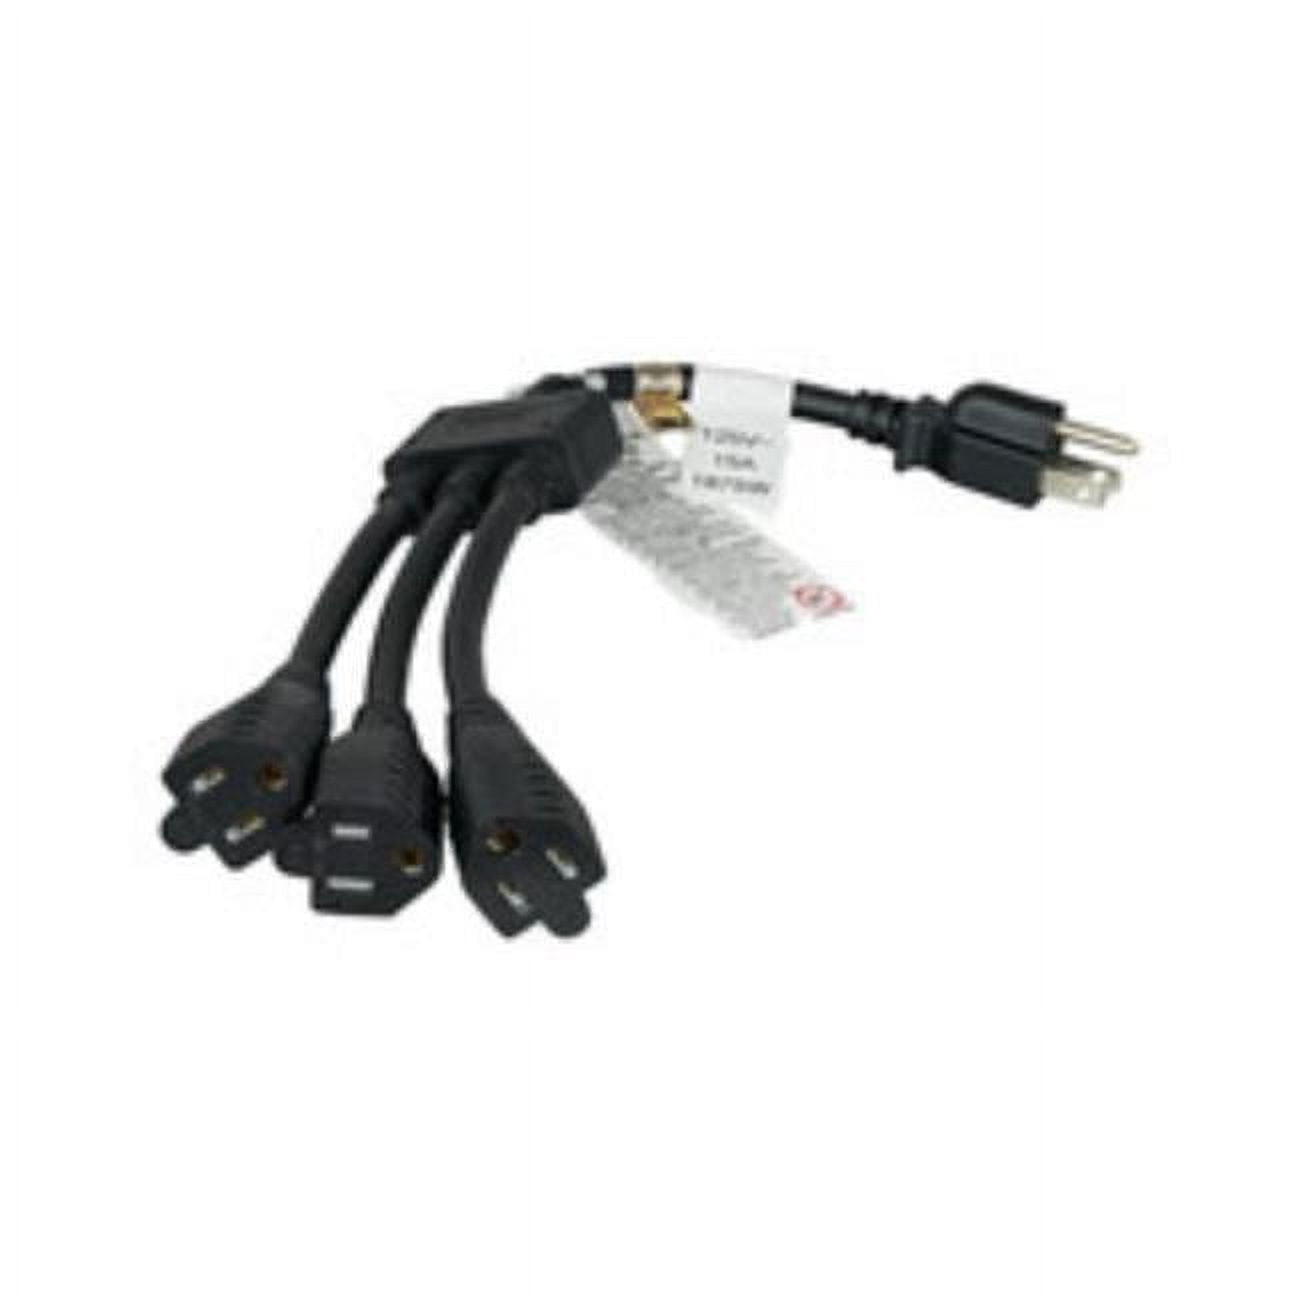 Picture of CableWholesale 10W2-02101.5W 18 in. 15A Nema 5-15P to 3X Nema 5-15R 14 AWG Power Cord Splitter, Black